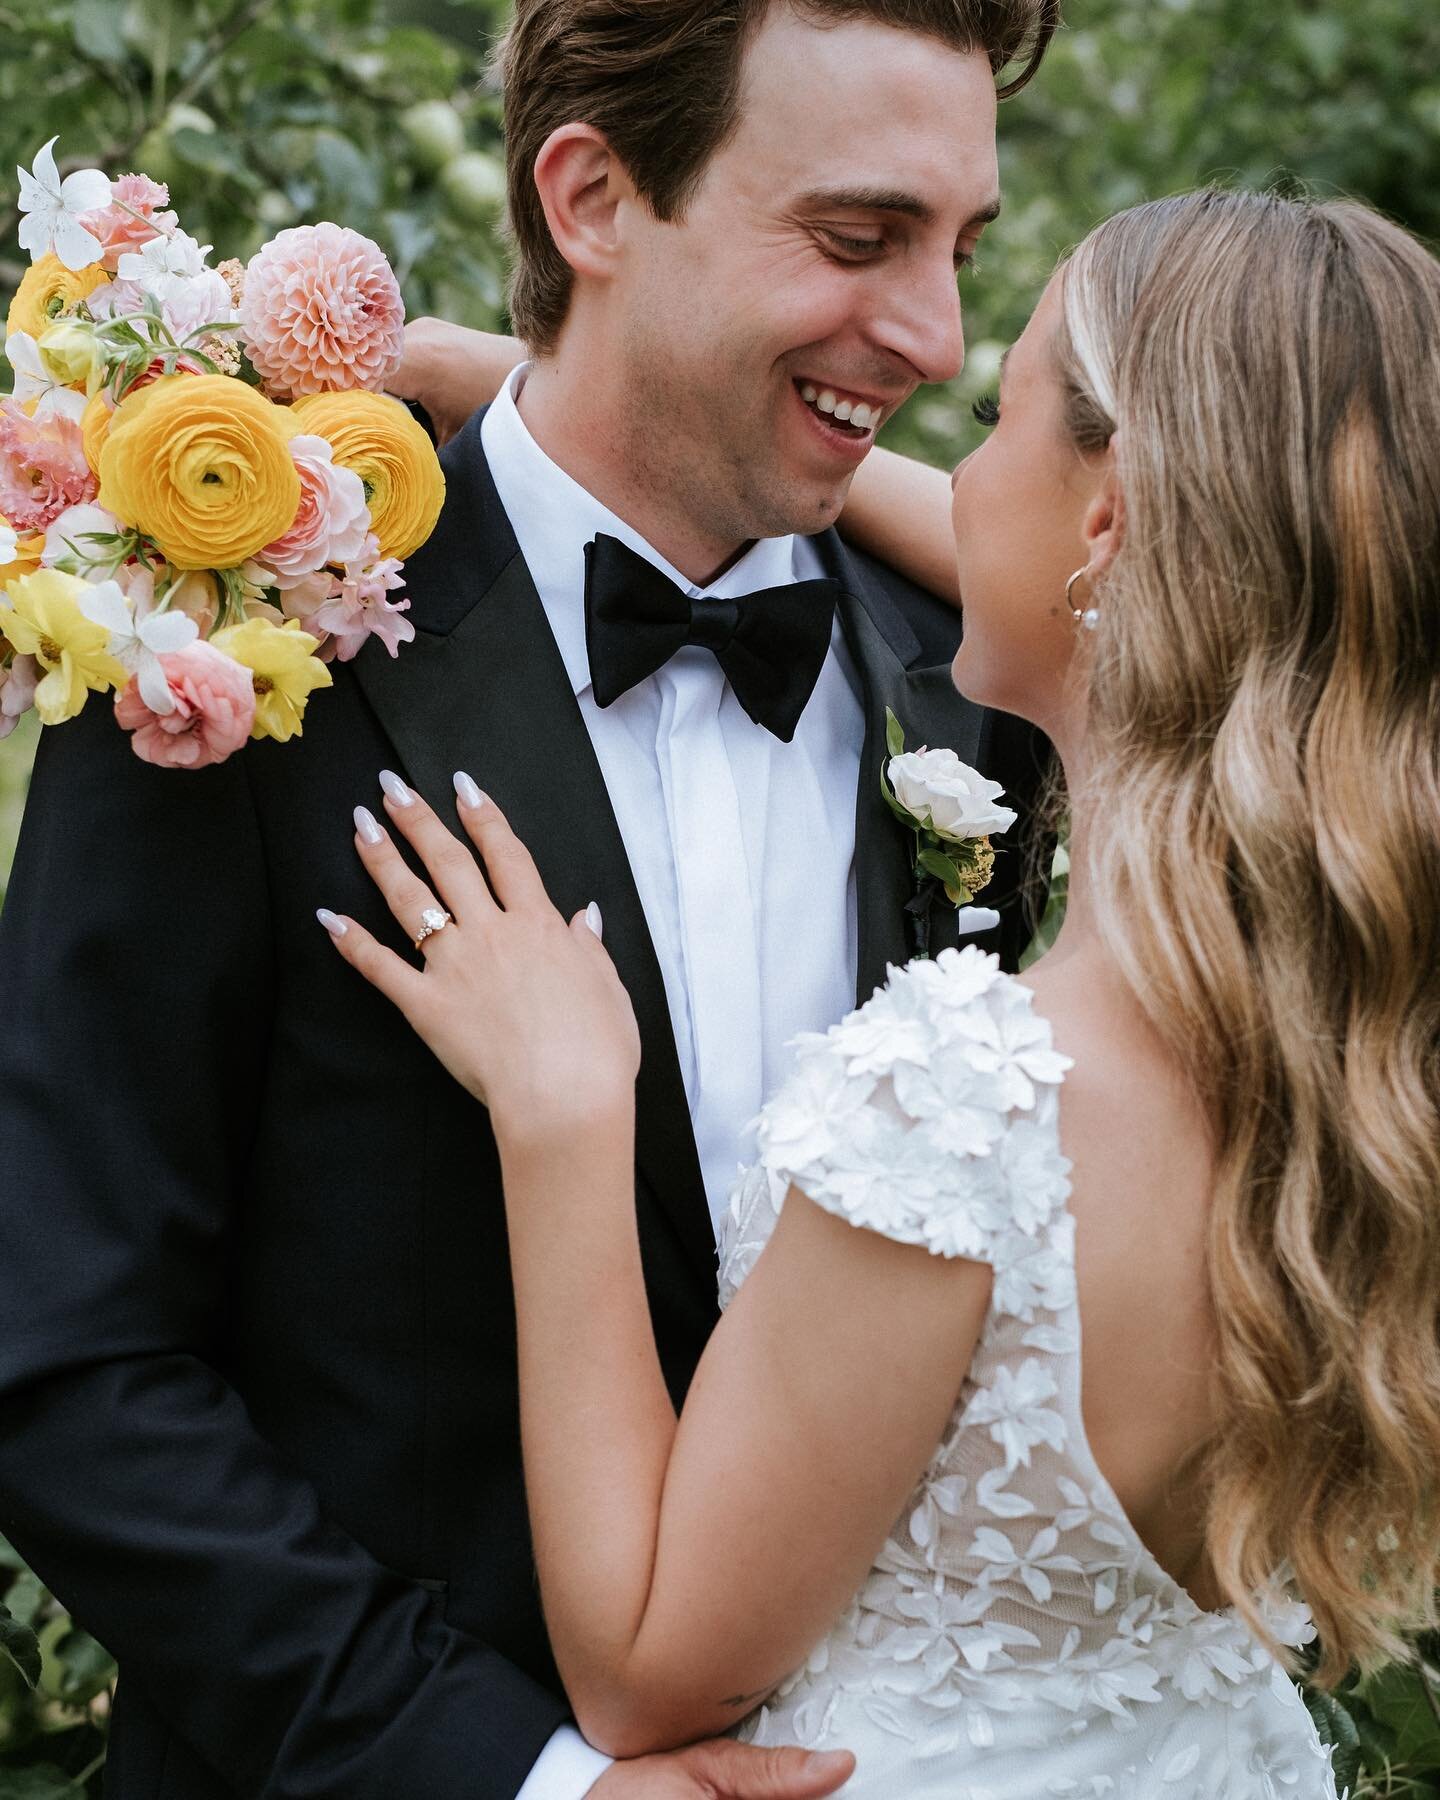 The sweetest portraits from Rachel &amp; Nick&rsquo;s Prince Edward County waterfront wedding day!

Their playful colour palette made a statement through Rachel&rsquo;s stunning bouquet - swipe for a closer look 👀 

Vendor Team:
Wedding Planner | @k